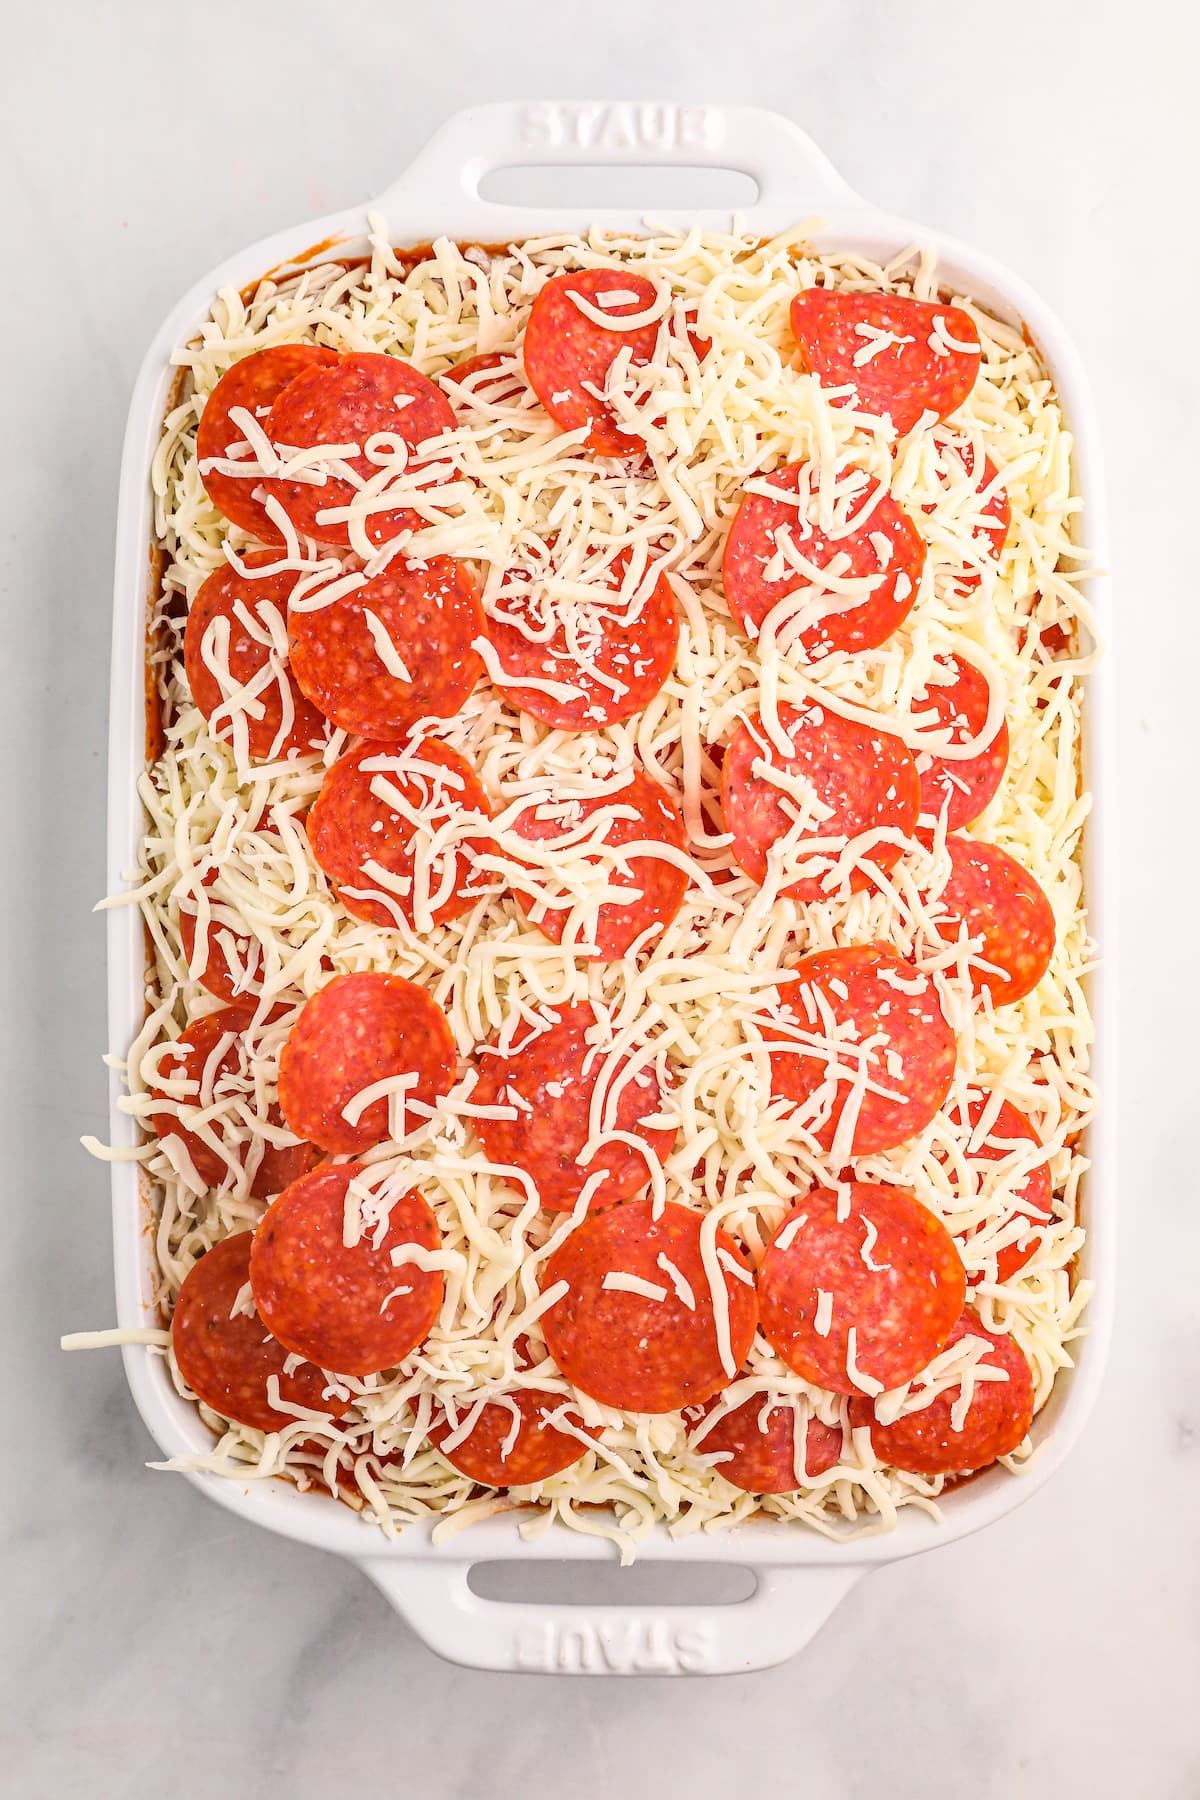 pizza casserole before it has been cooked, in a baking dish